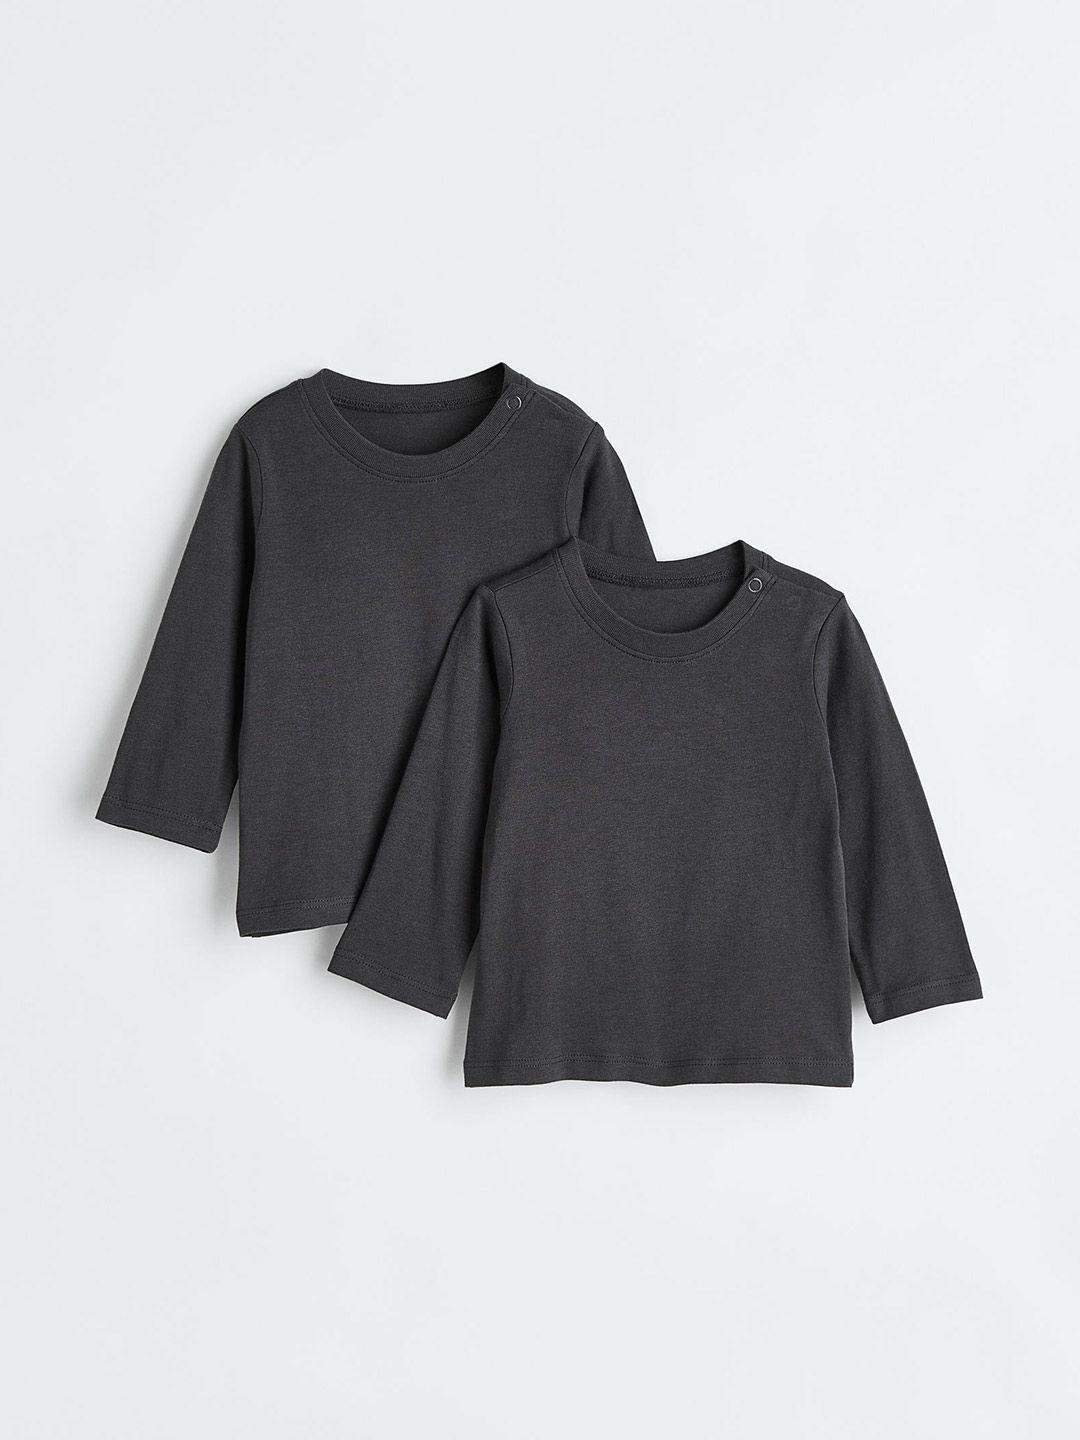 h&m boys 2-pack cotton jersey tops